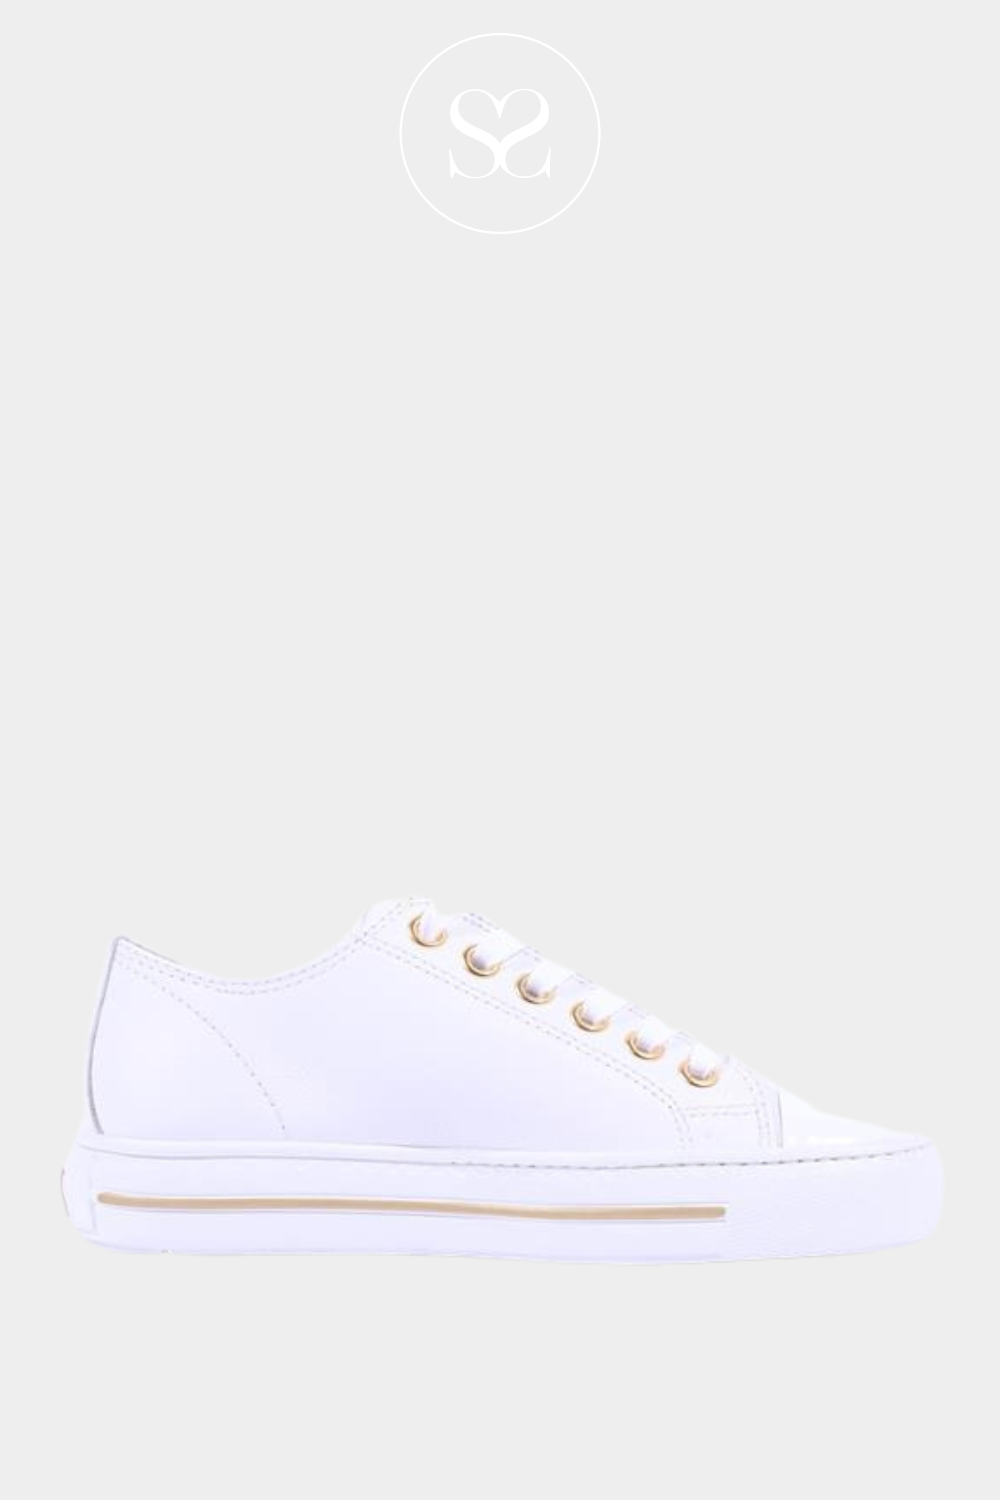 White paul green trainers with gold detailing